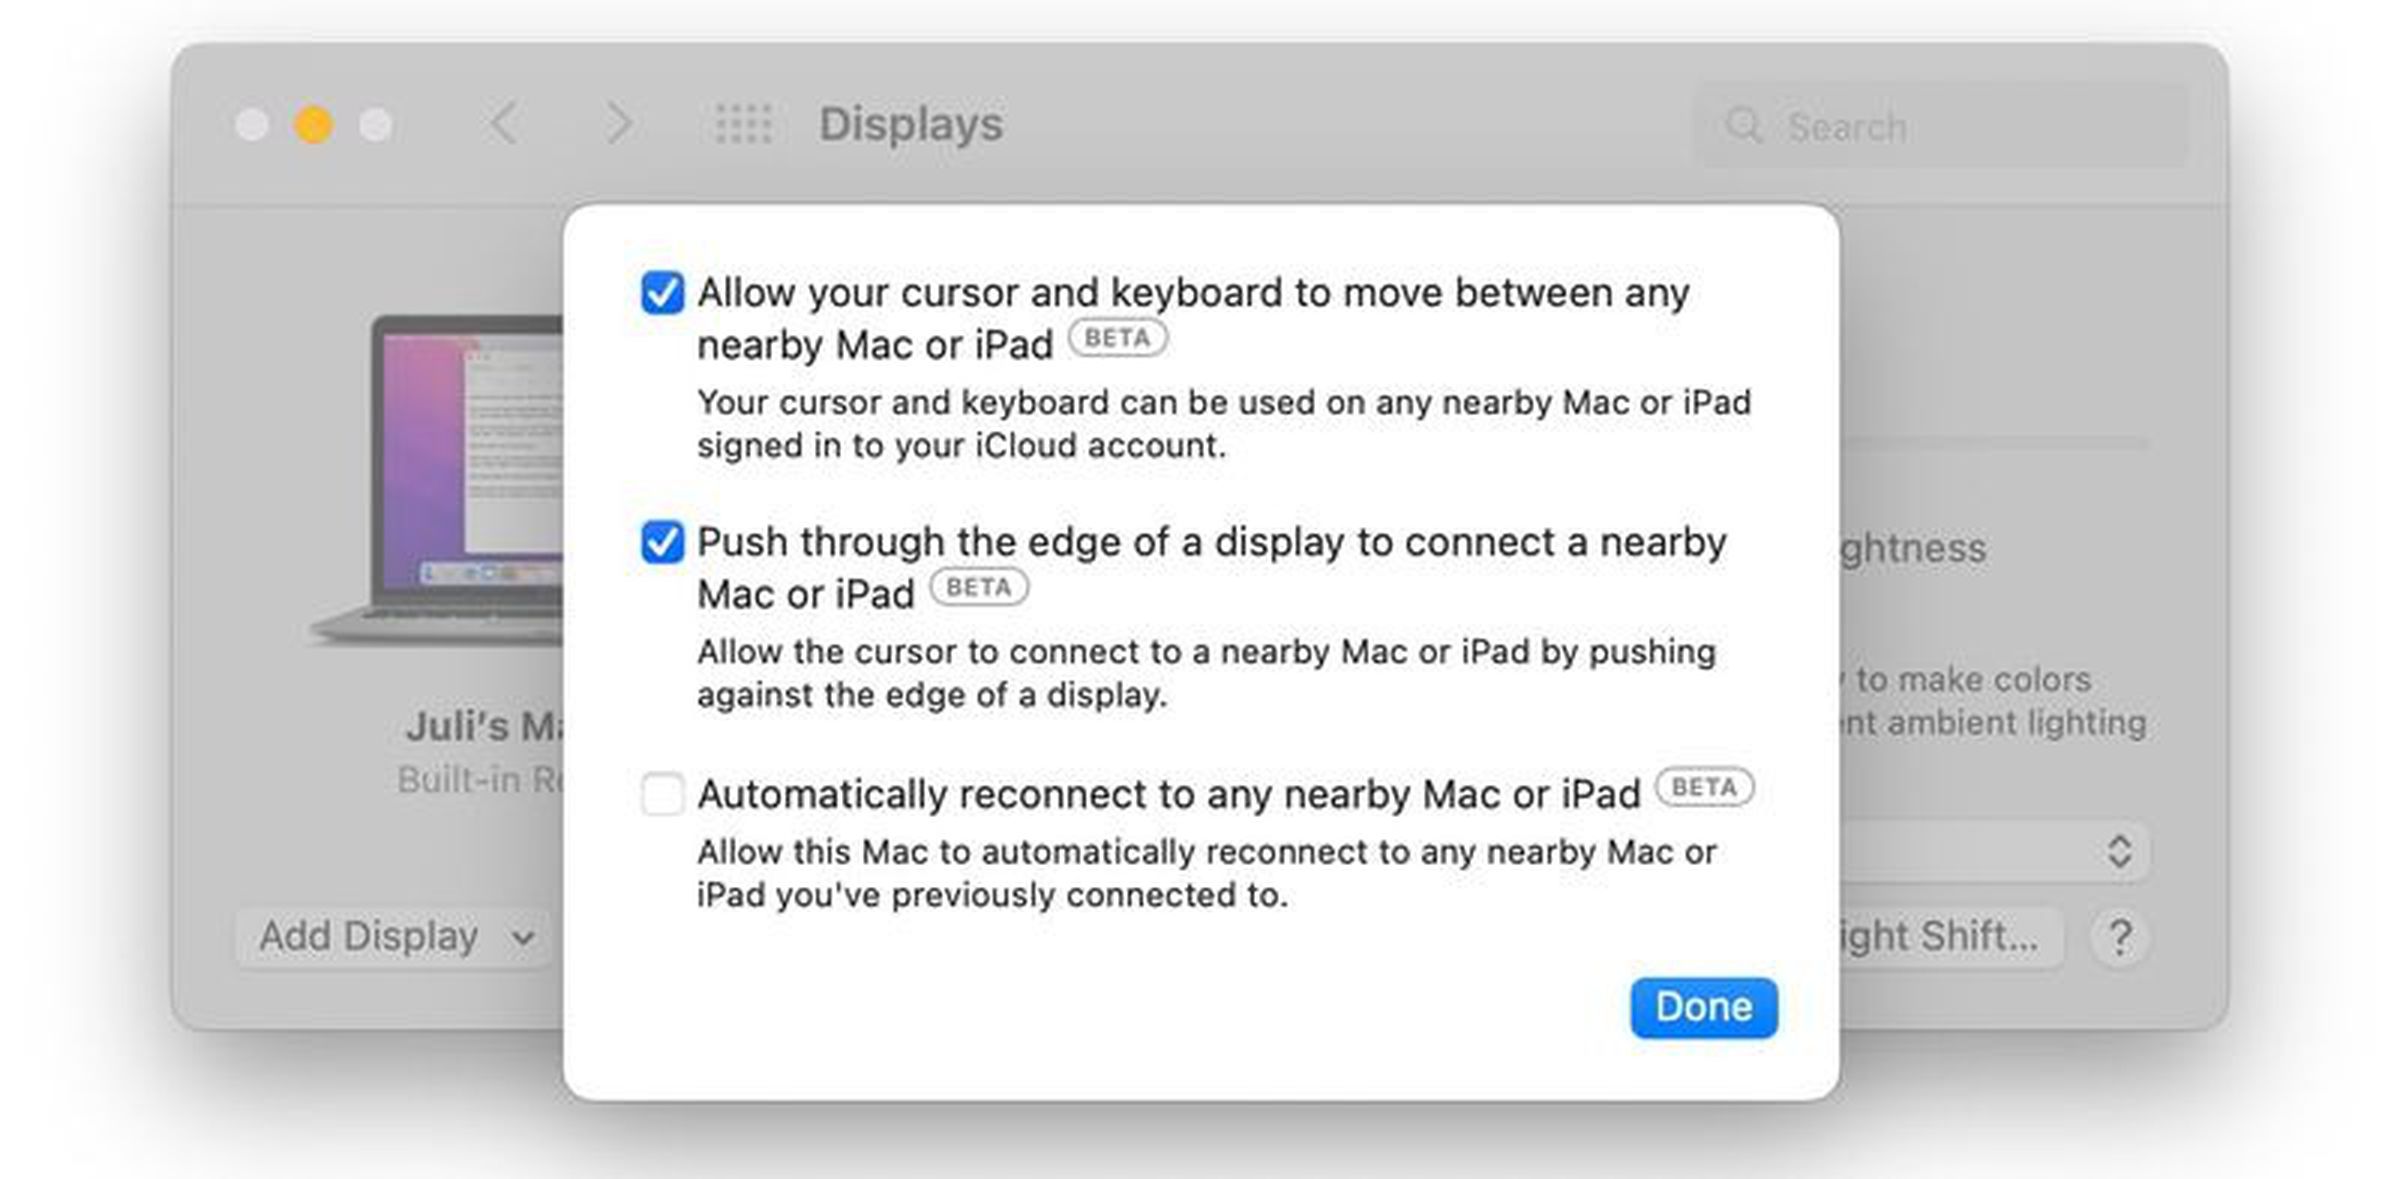 Apple is marking these settings with a beta tag.